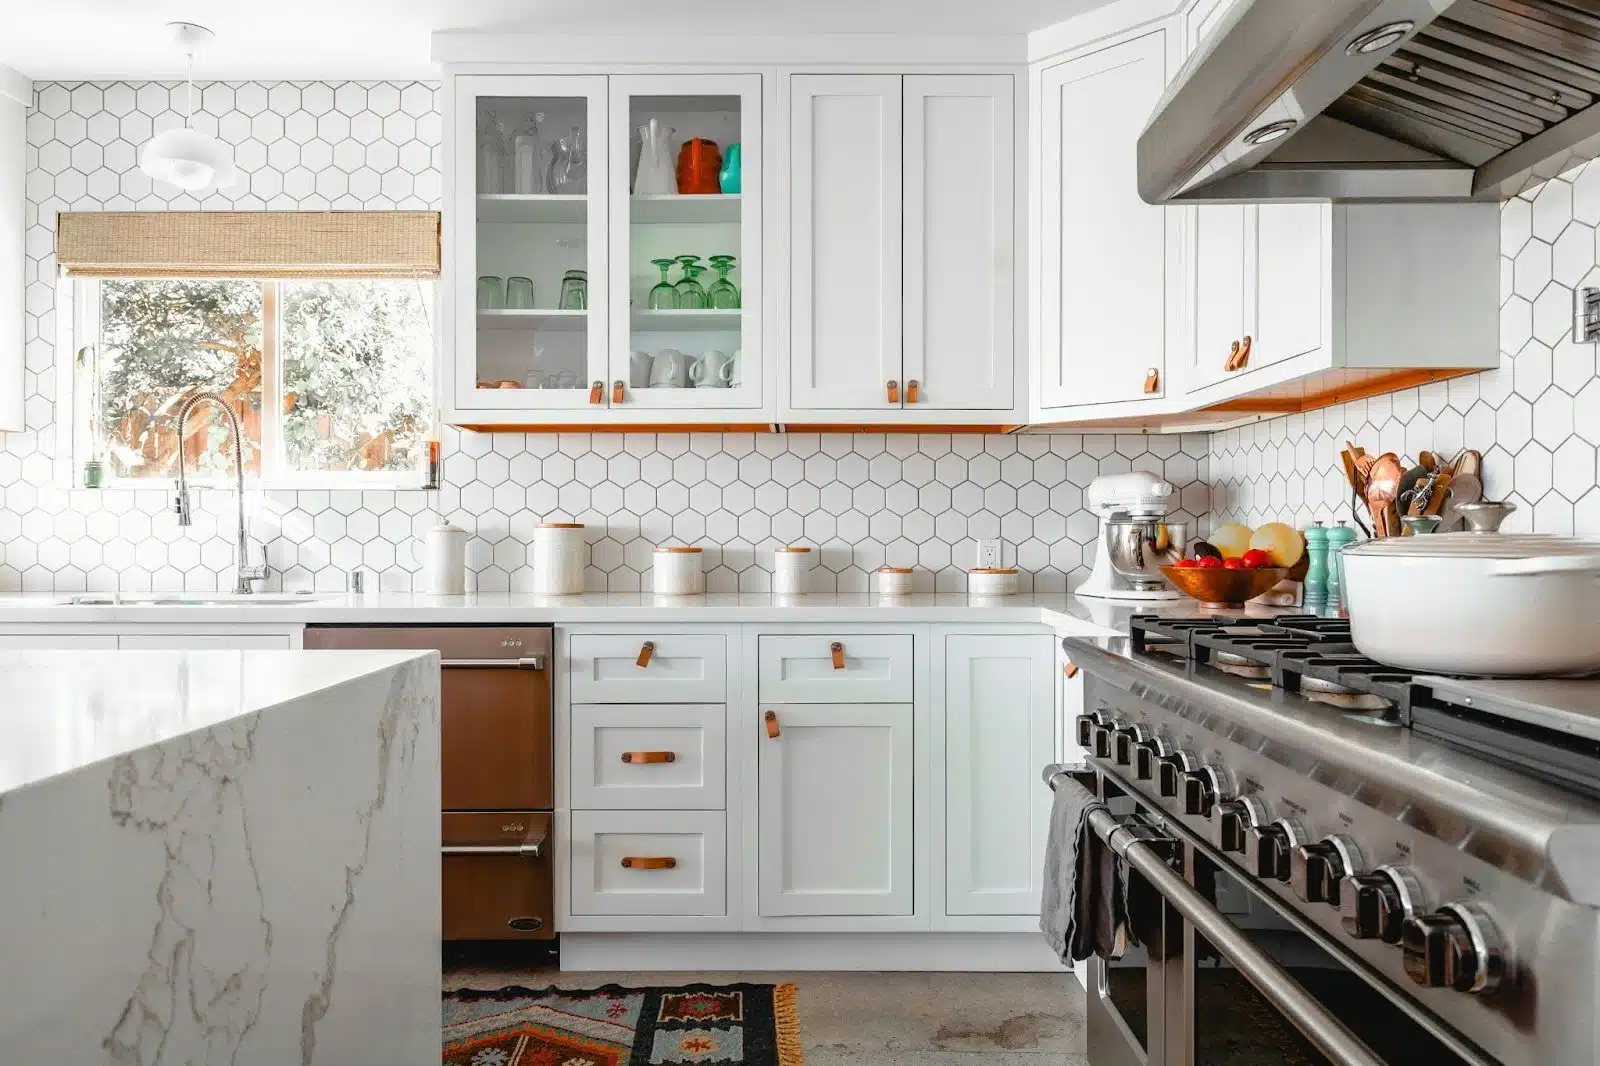 An organized kitchen with white counters.